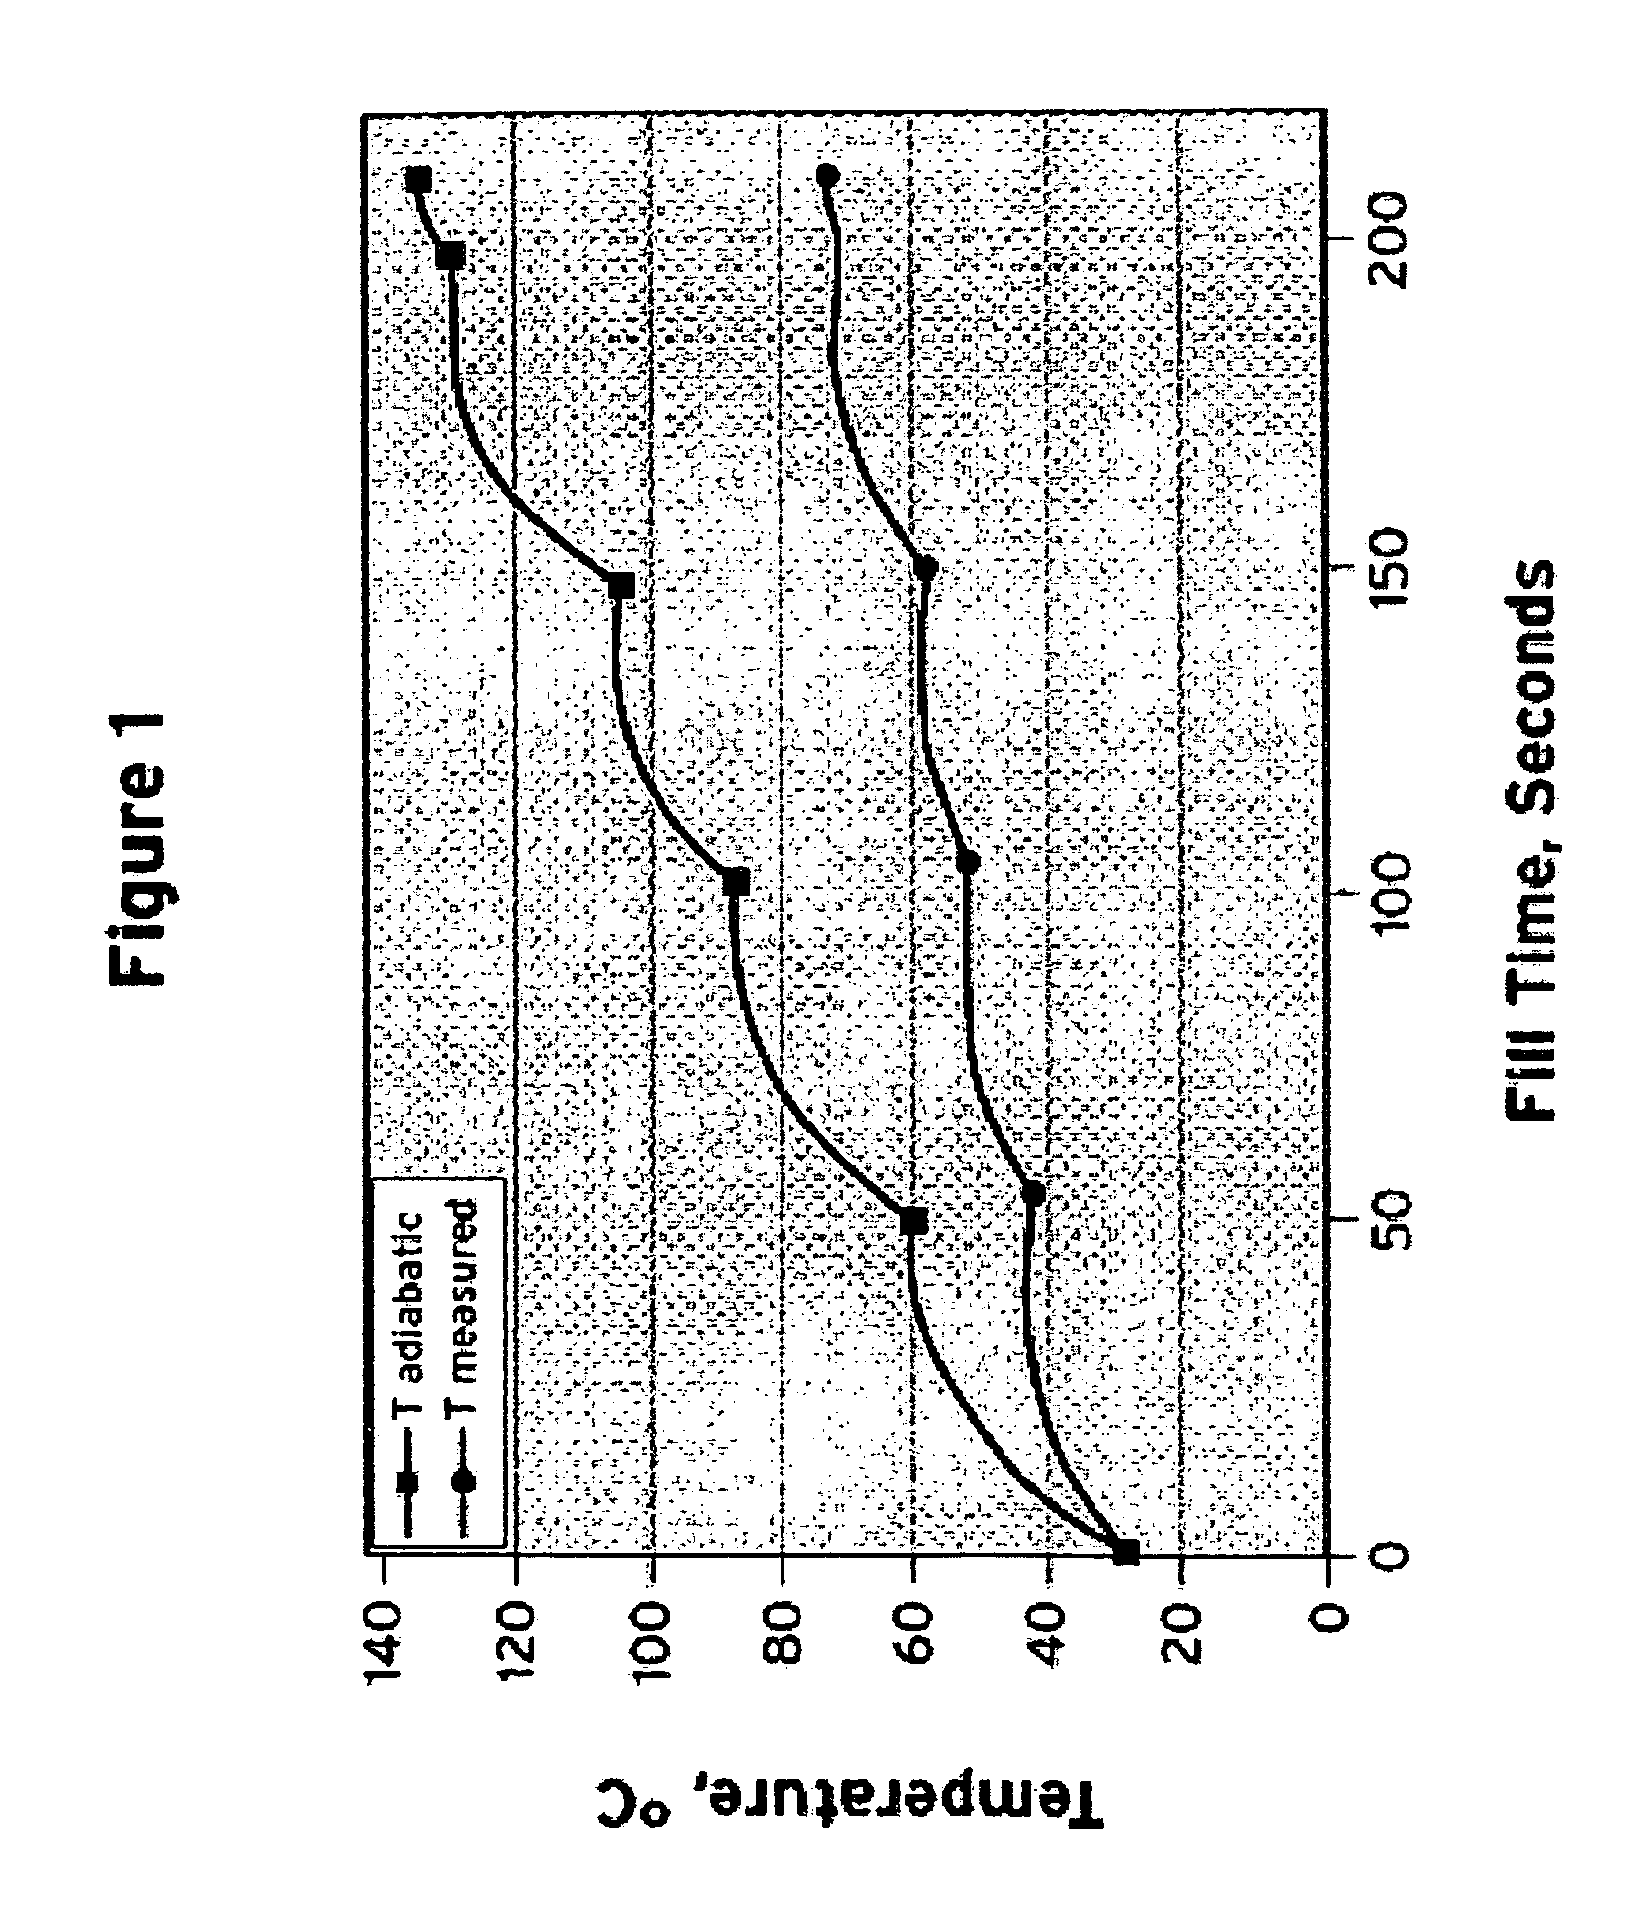 Method for calculating hydrogen temperature during vehicle fueling